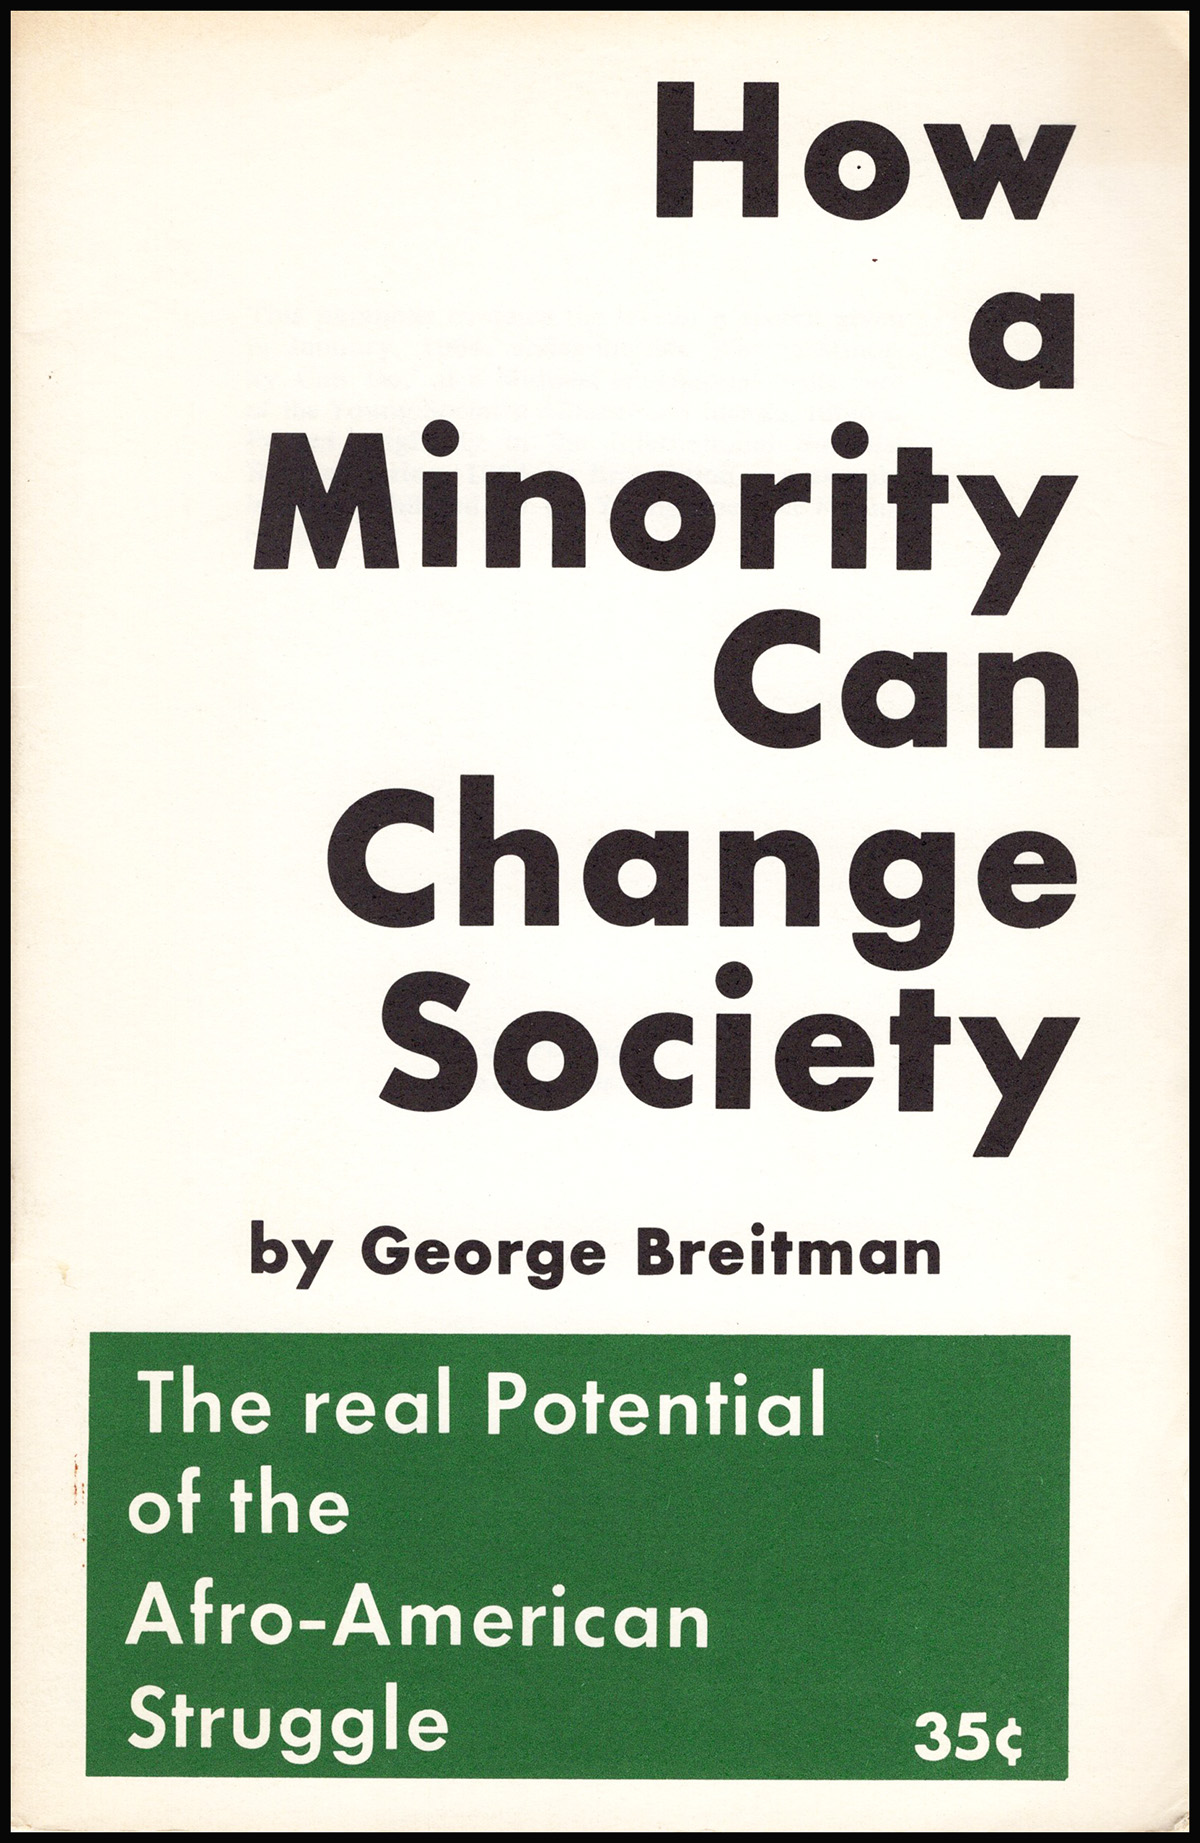 Breitman, George; Morrison, Derrick - How a Minority Can Change Society: The Real Potential of the Afro-American Struggle